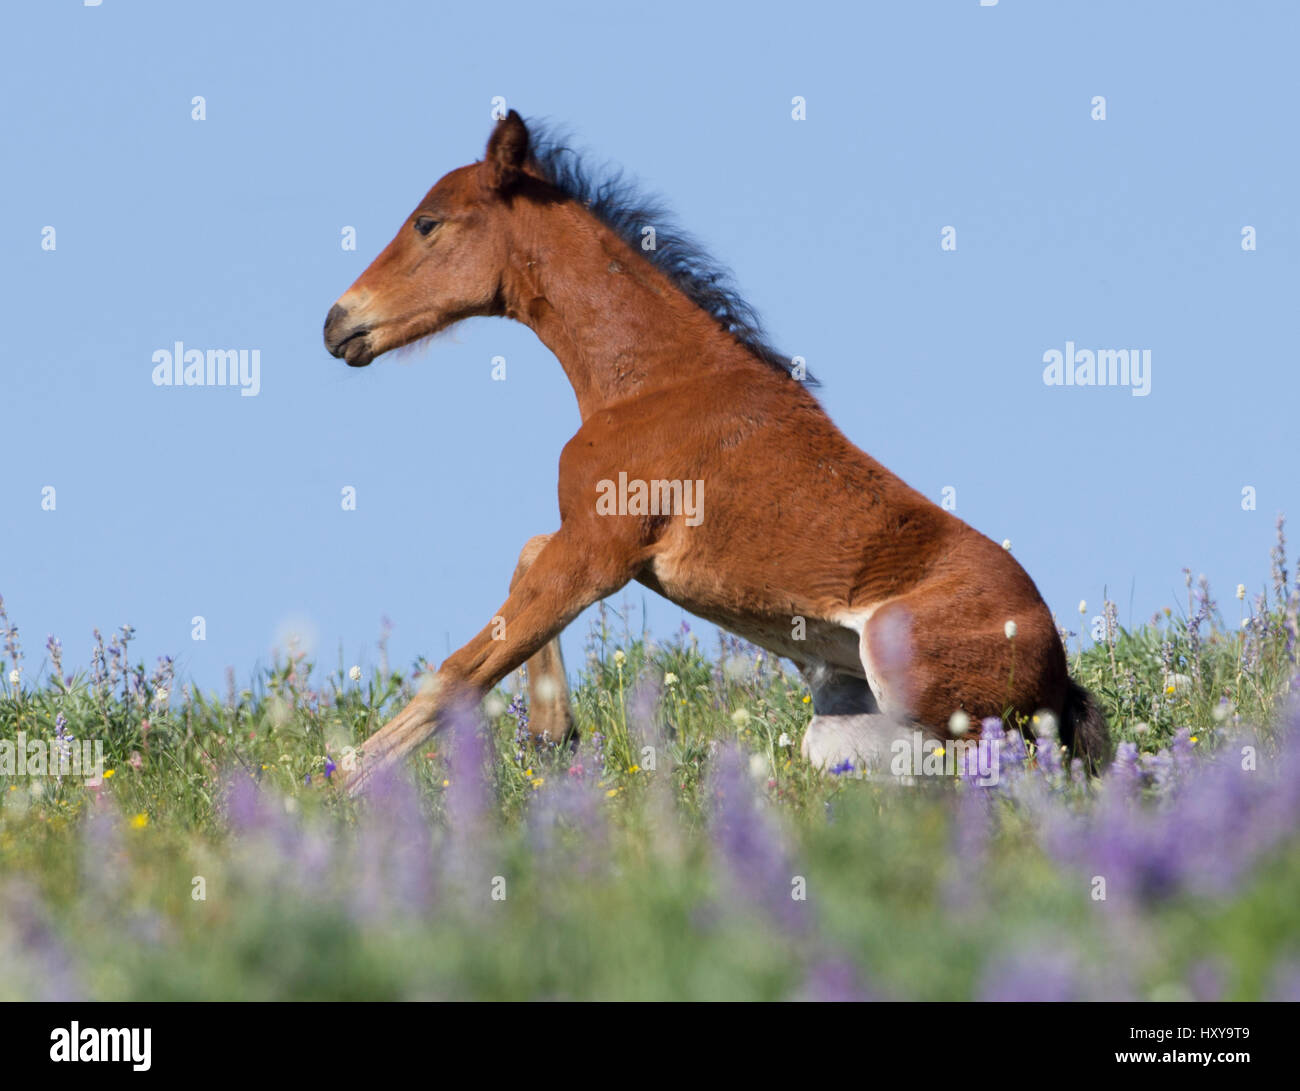 Wild horse / Mustang, foal getting up from resting amongst wild flowers, Pryor mountains, Montana, USA Stock Photo